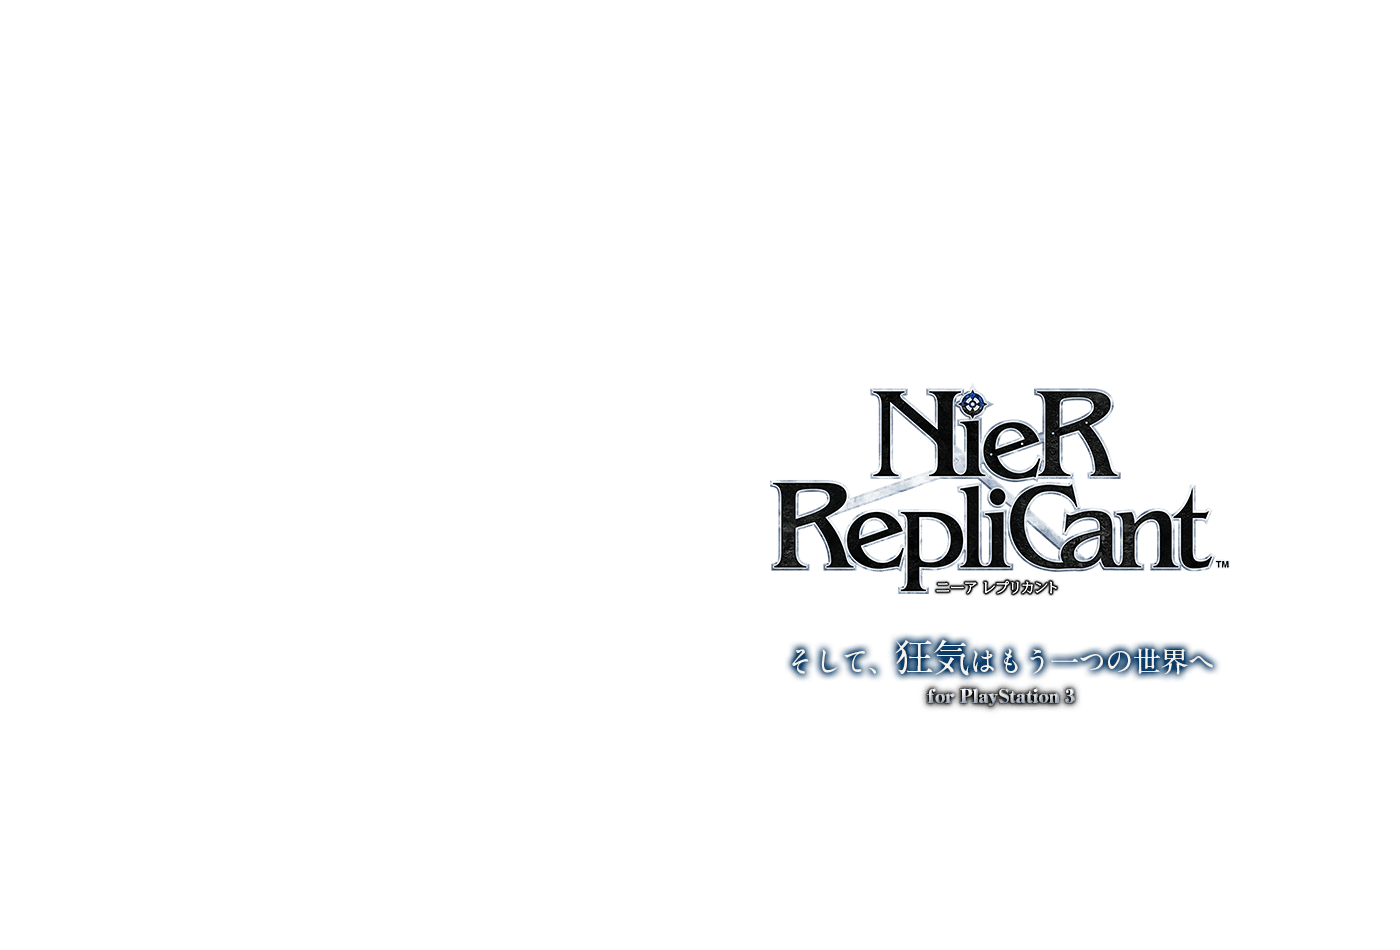 NieR RepliCant（ニーアレプリカント）　そして、狂気はもう一つの世界へ　for PlayStation3